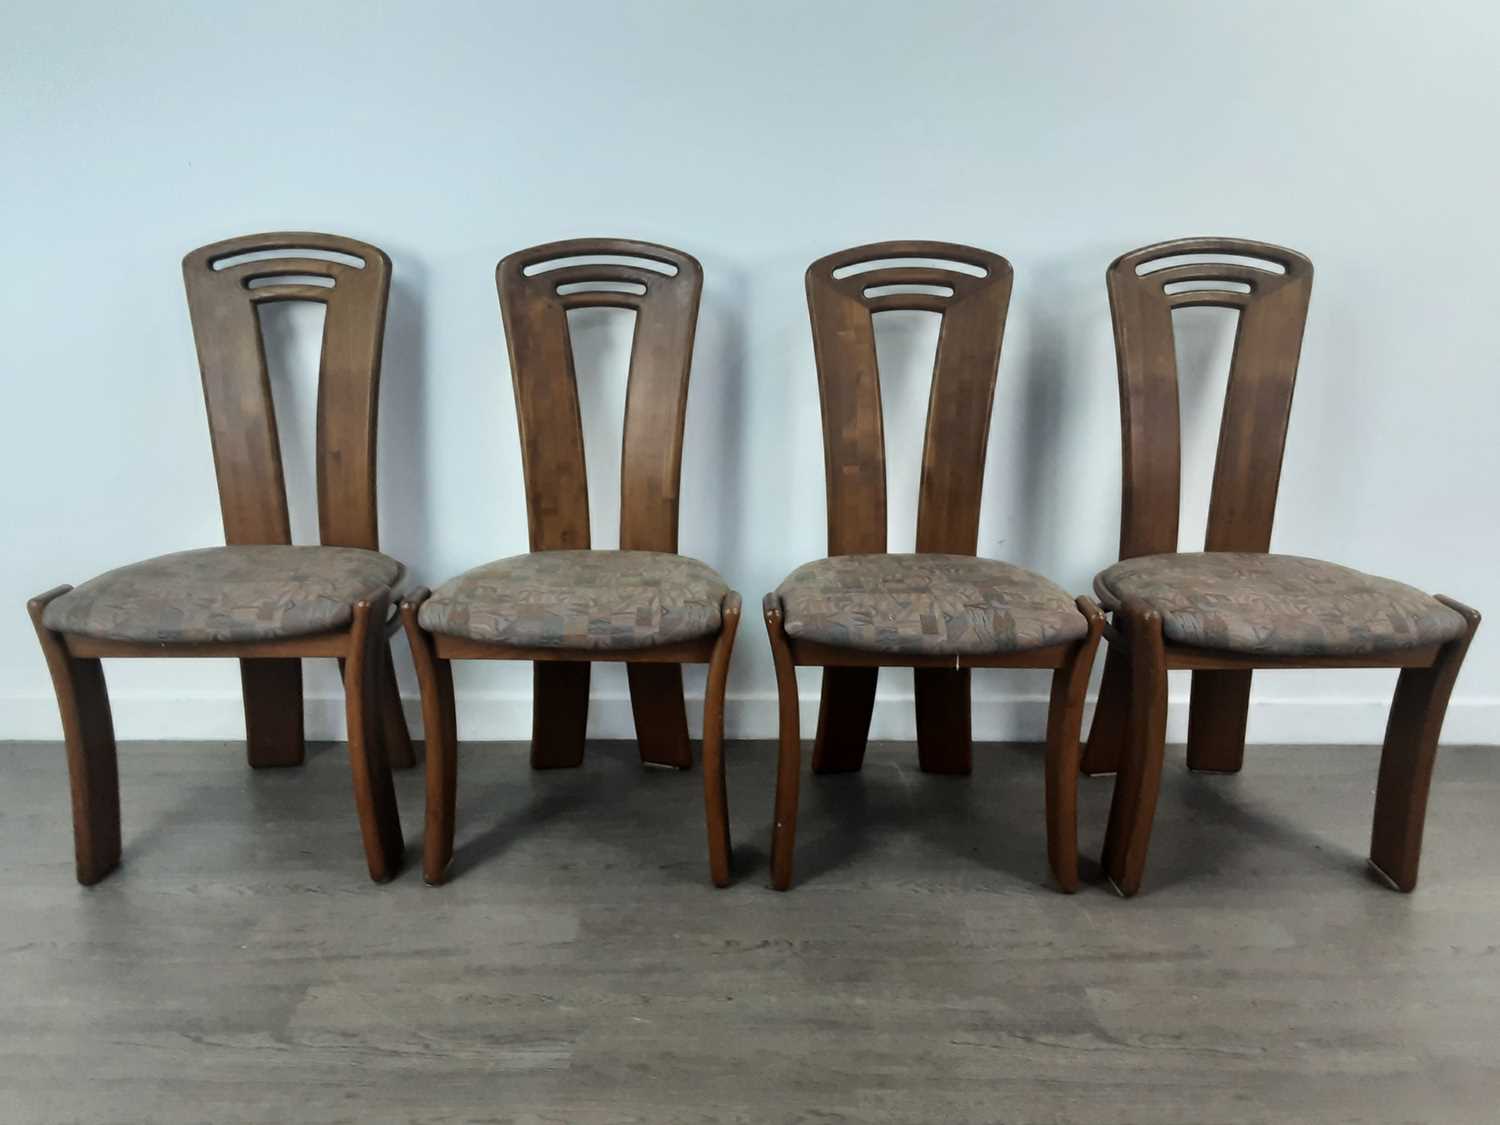 BOLTINGE OF DENMARK, SET OF SIX POST-MODERN TEAK DINING CHAIRS, CIRCA 1980s - Image 4 of 16